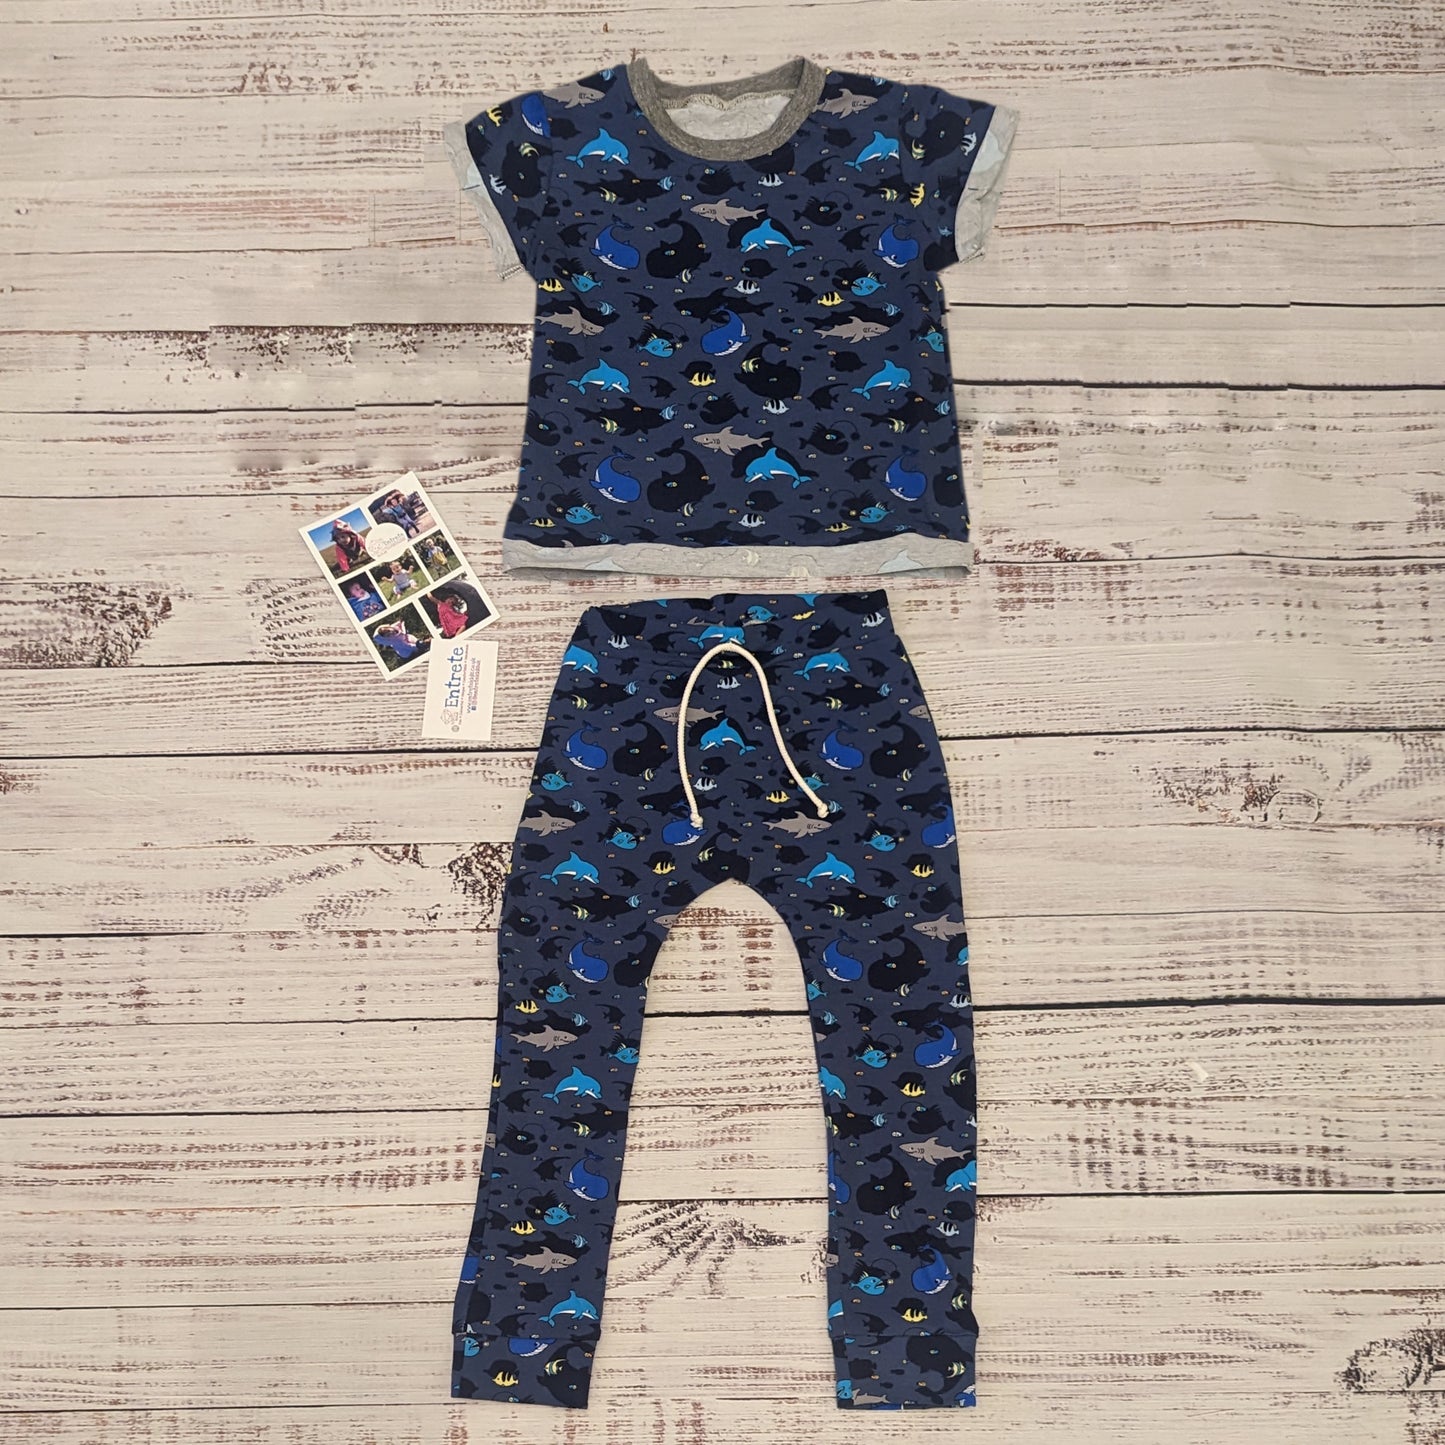 Kids navy sea creatures harem joggers. Handmade using navy sea life shadows cotton jersey. Shown as an outfit with matching short sleeve T-shirt.